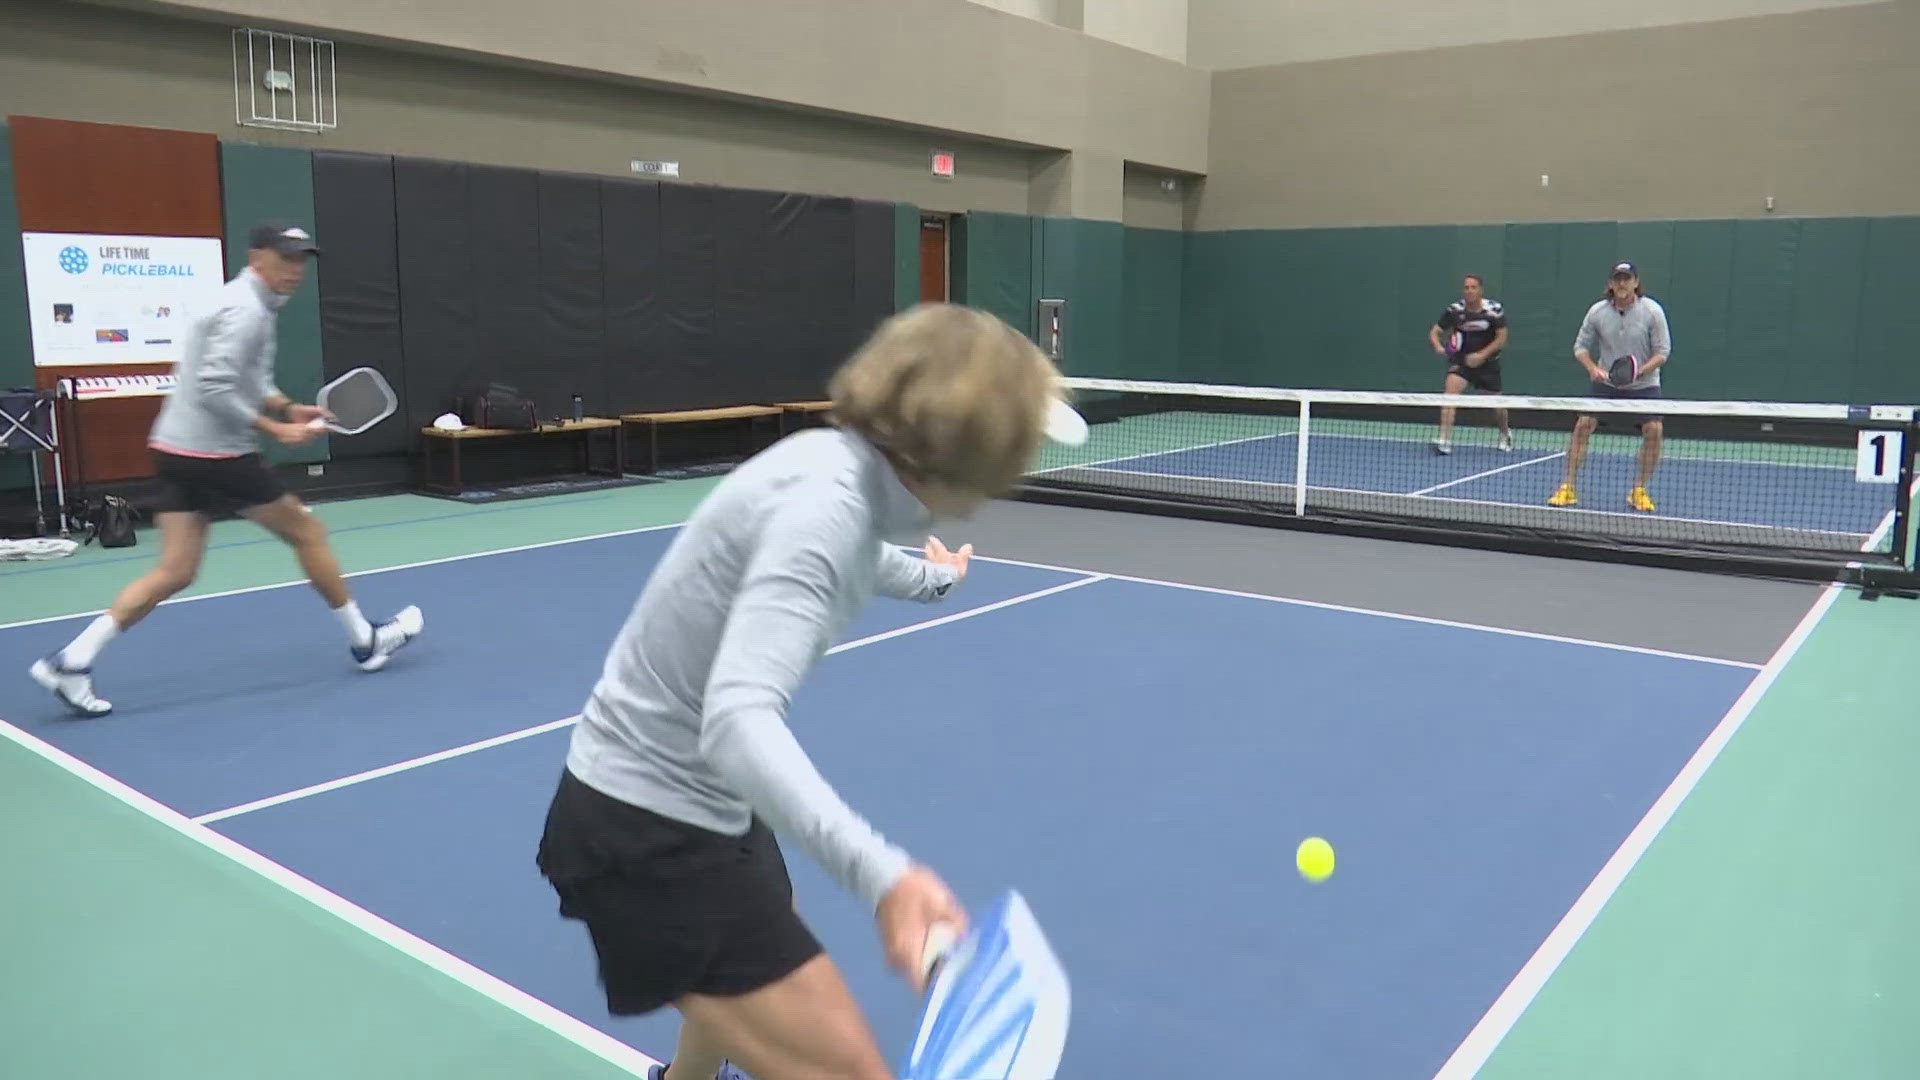 13News reporter Samantha Johnson takes a look at a local pickleball team looking to defend their title.